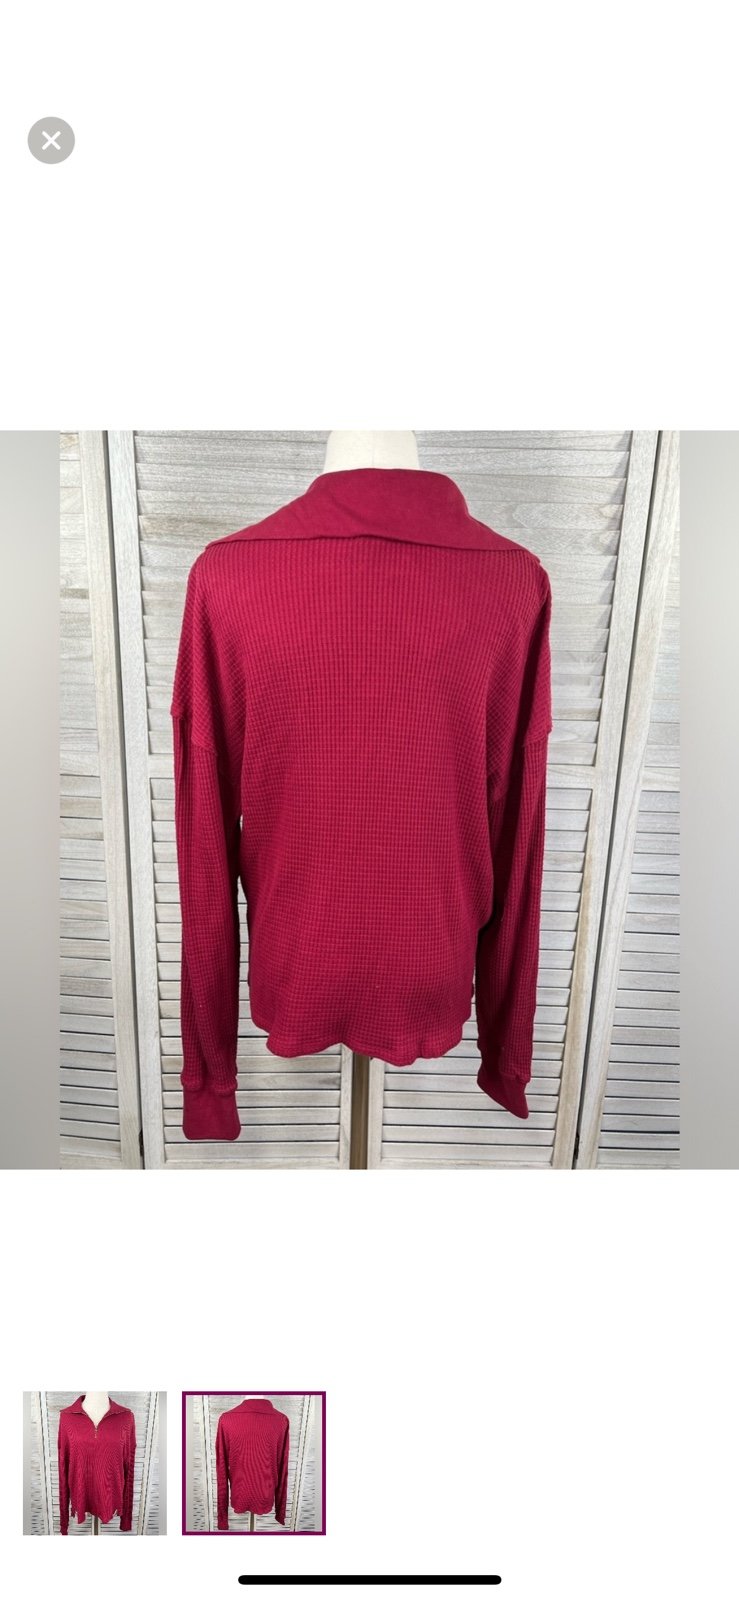 Popular UNIVERSAL THREAD Thermal Knit Long Sleeve Zipped Neckline Cranberry-Large oNfmbeKsx Great